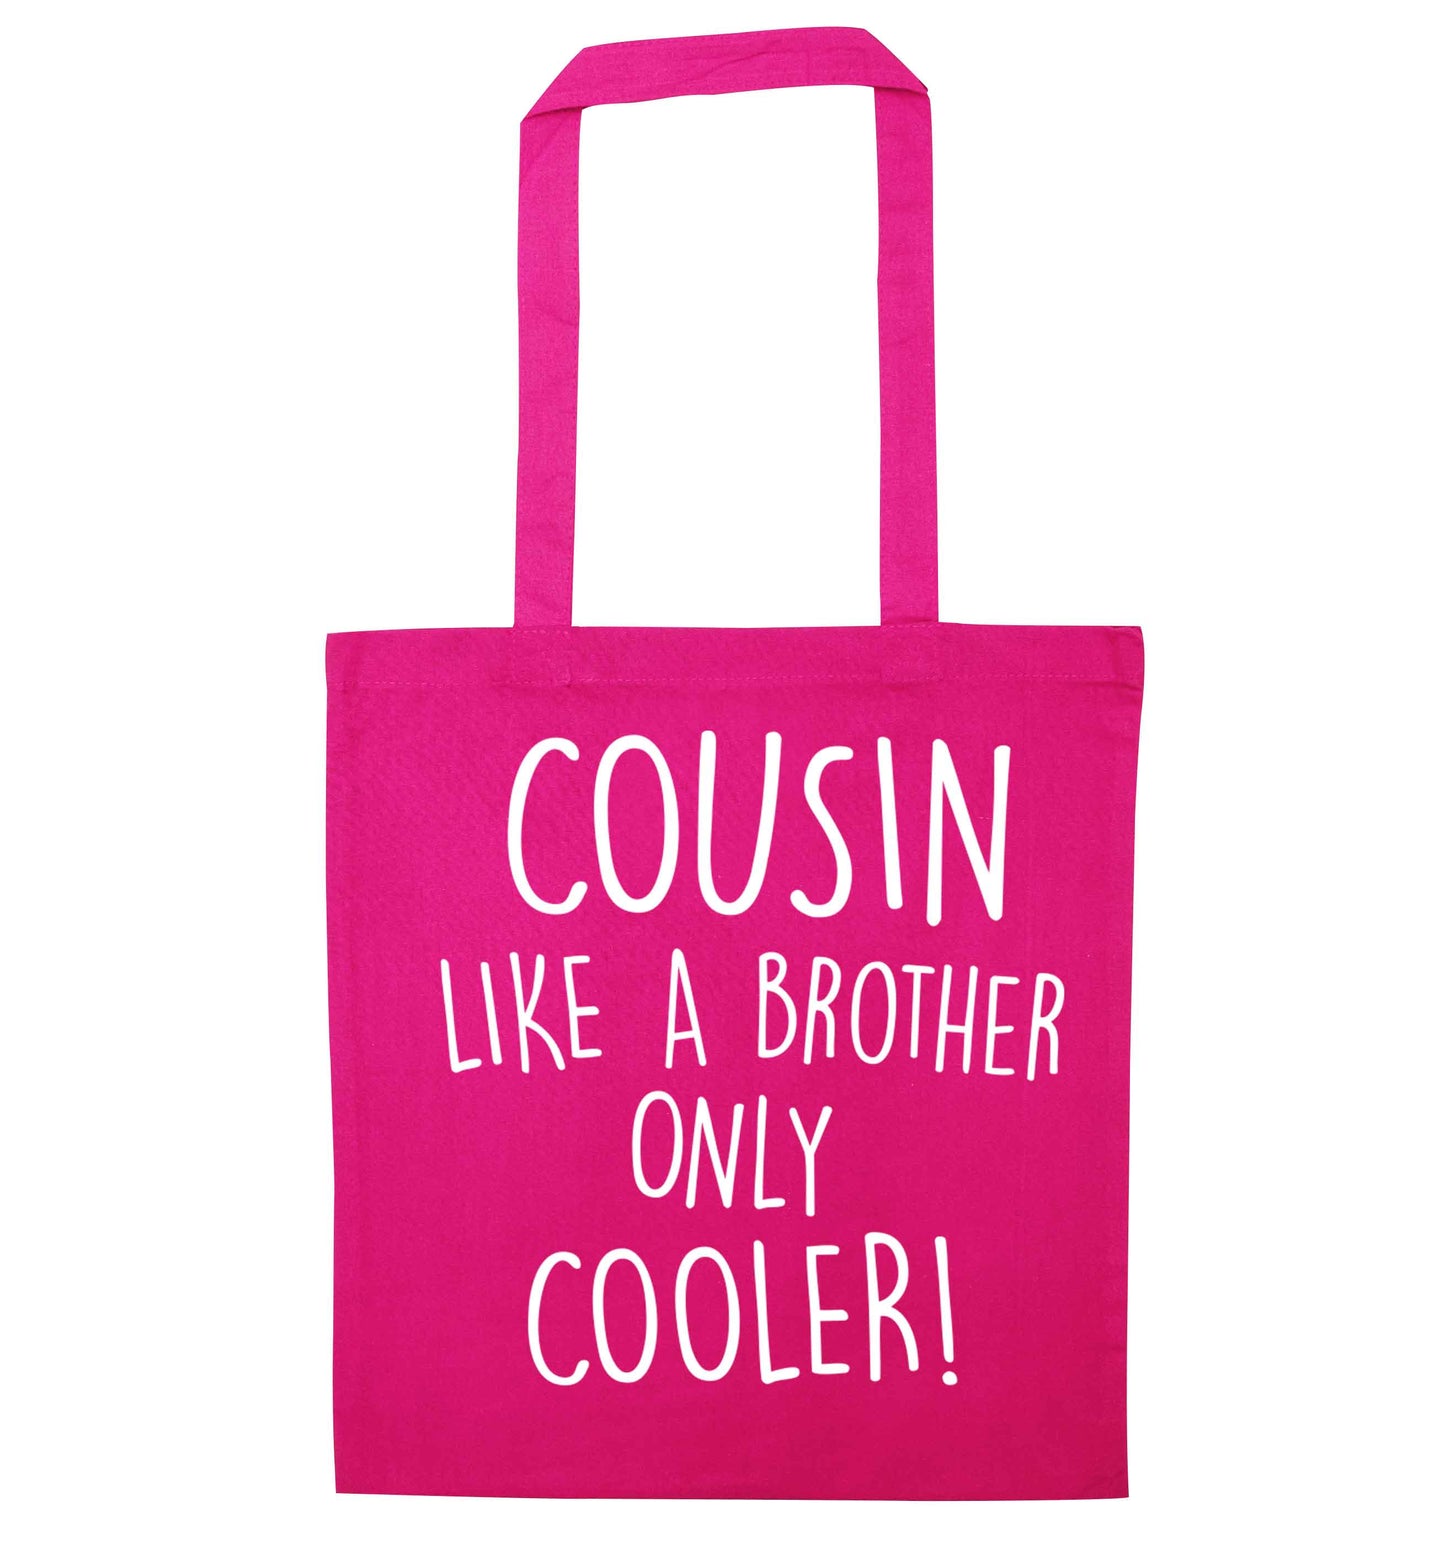 Cousin like a brother only cooler pink tote bag